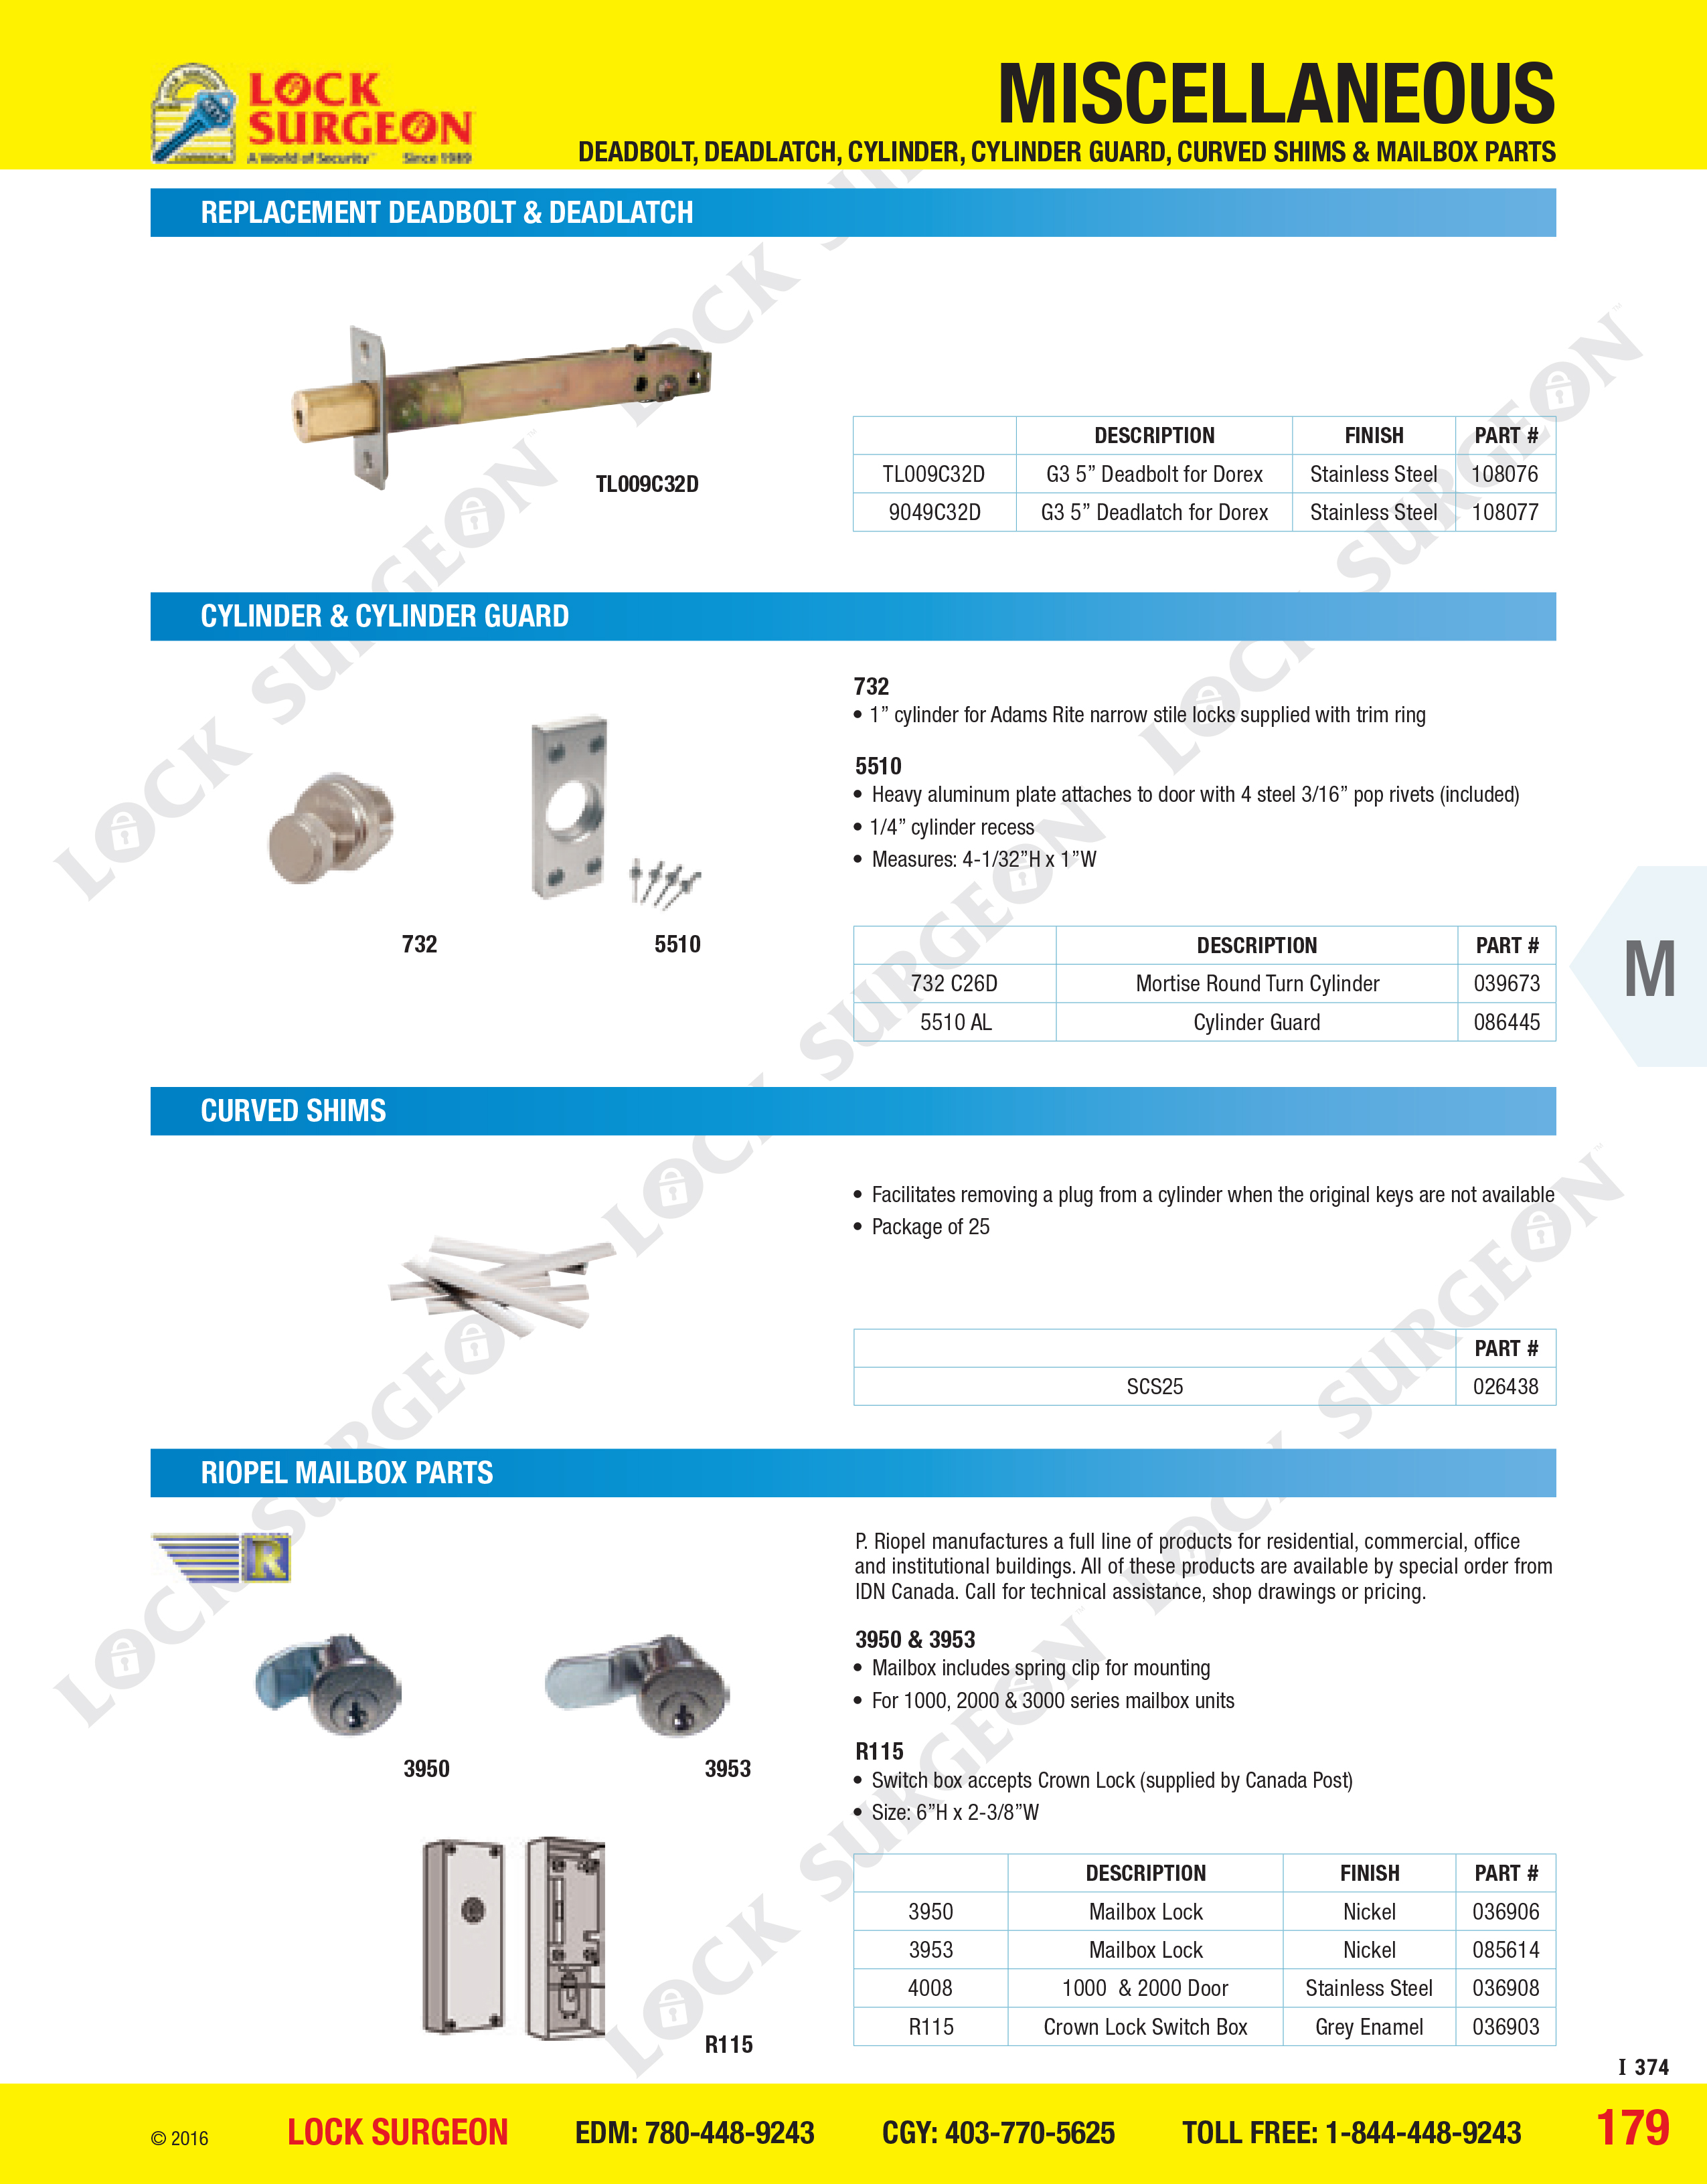 Five-inch deadbolts deadlatches cylinders curved shims & mailbox parts sold at Lock Surgeon Calgary.